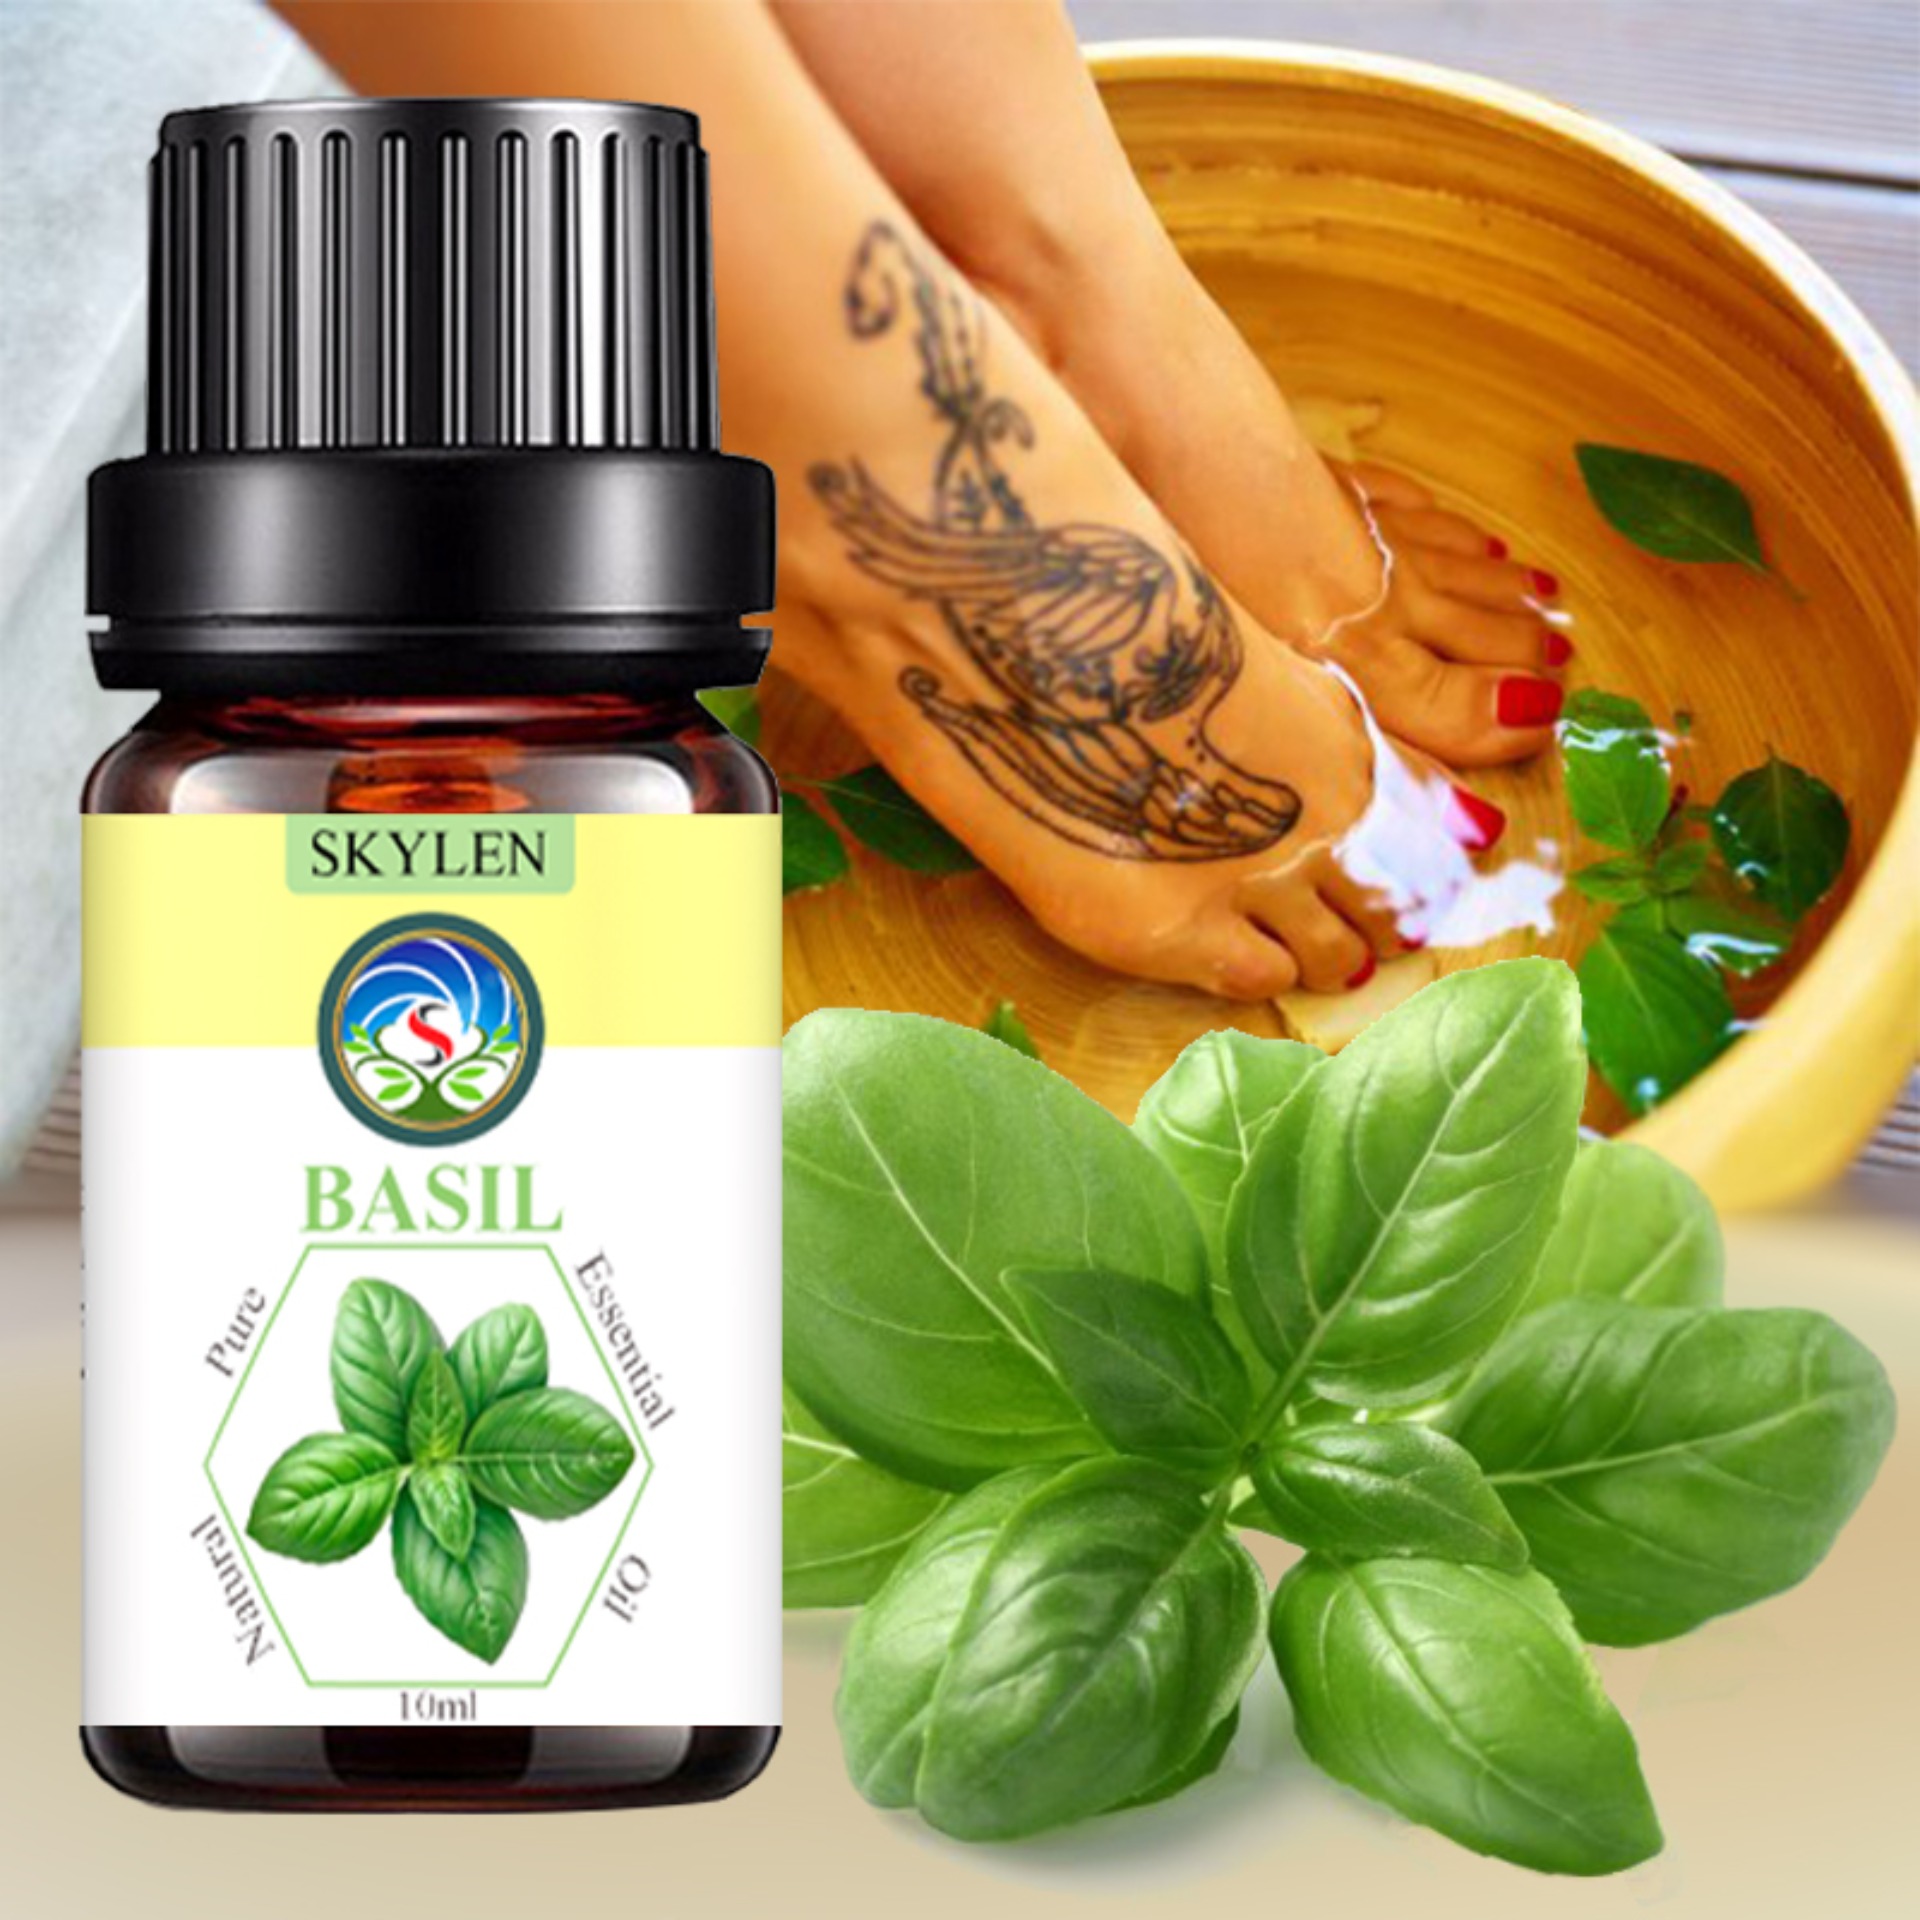 Essential basil essential oil emulsifies the room extracted from natural